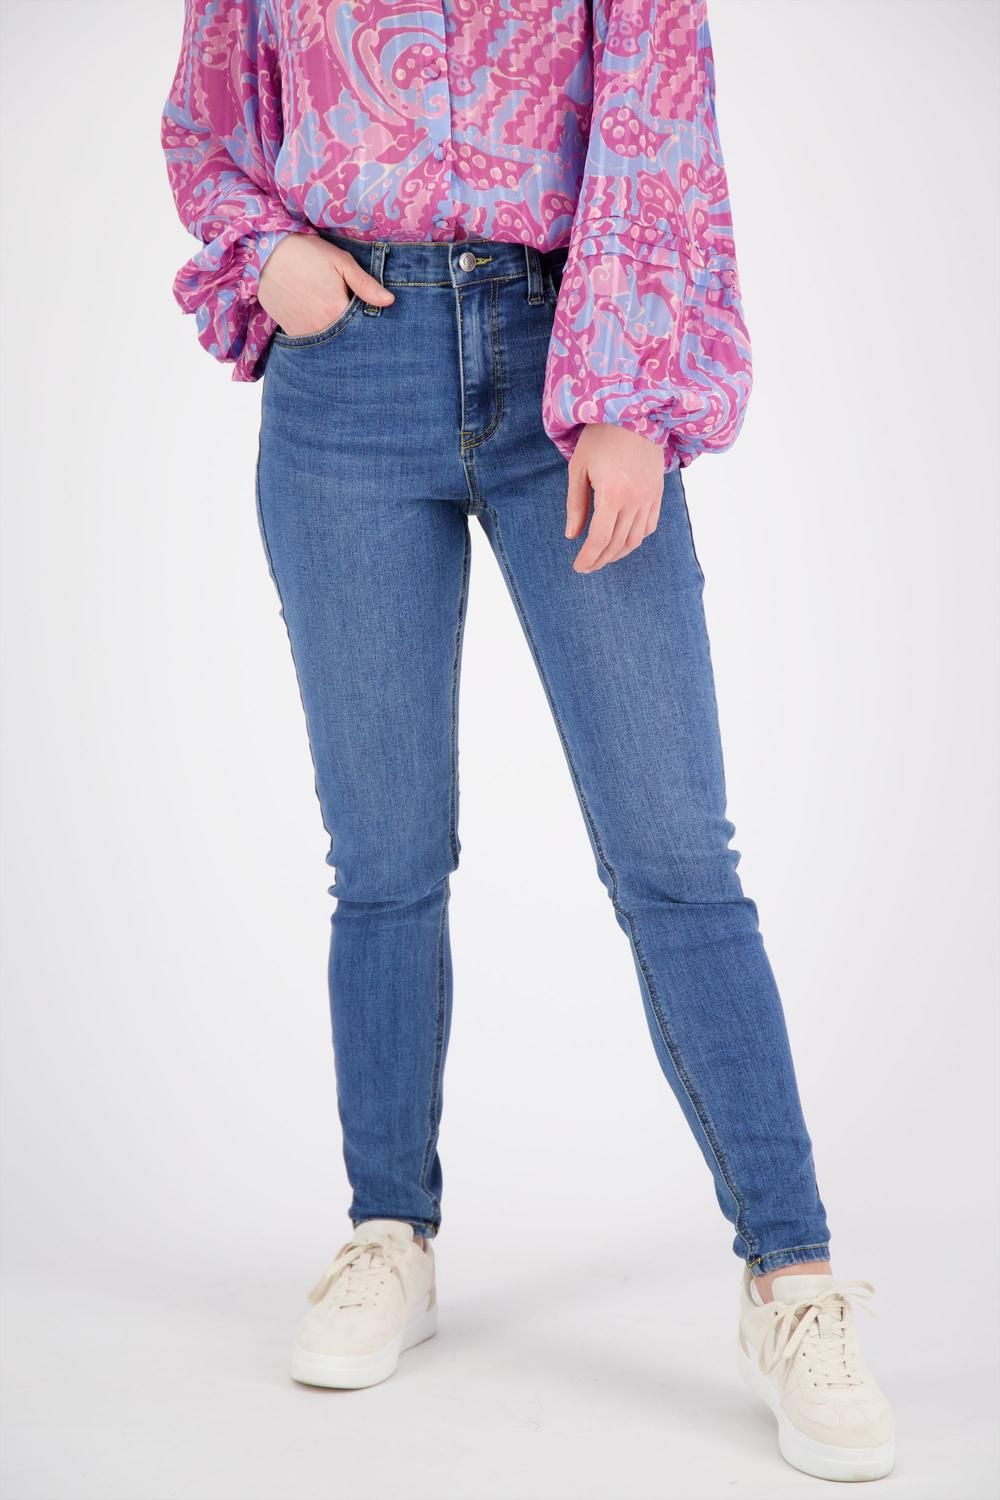 Freequent Broek Harlow Jeans